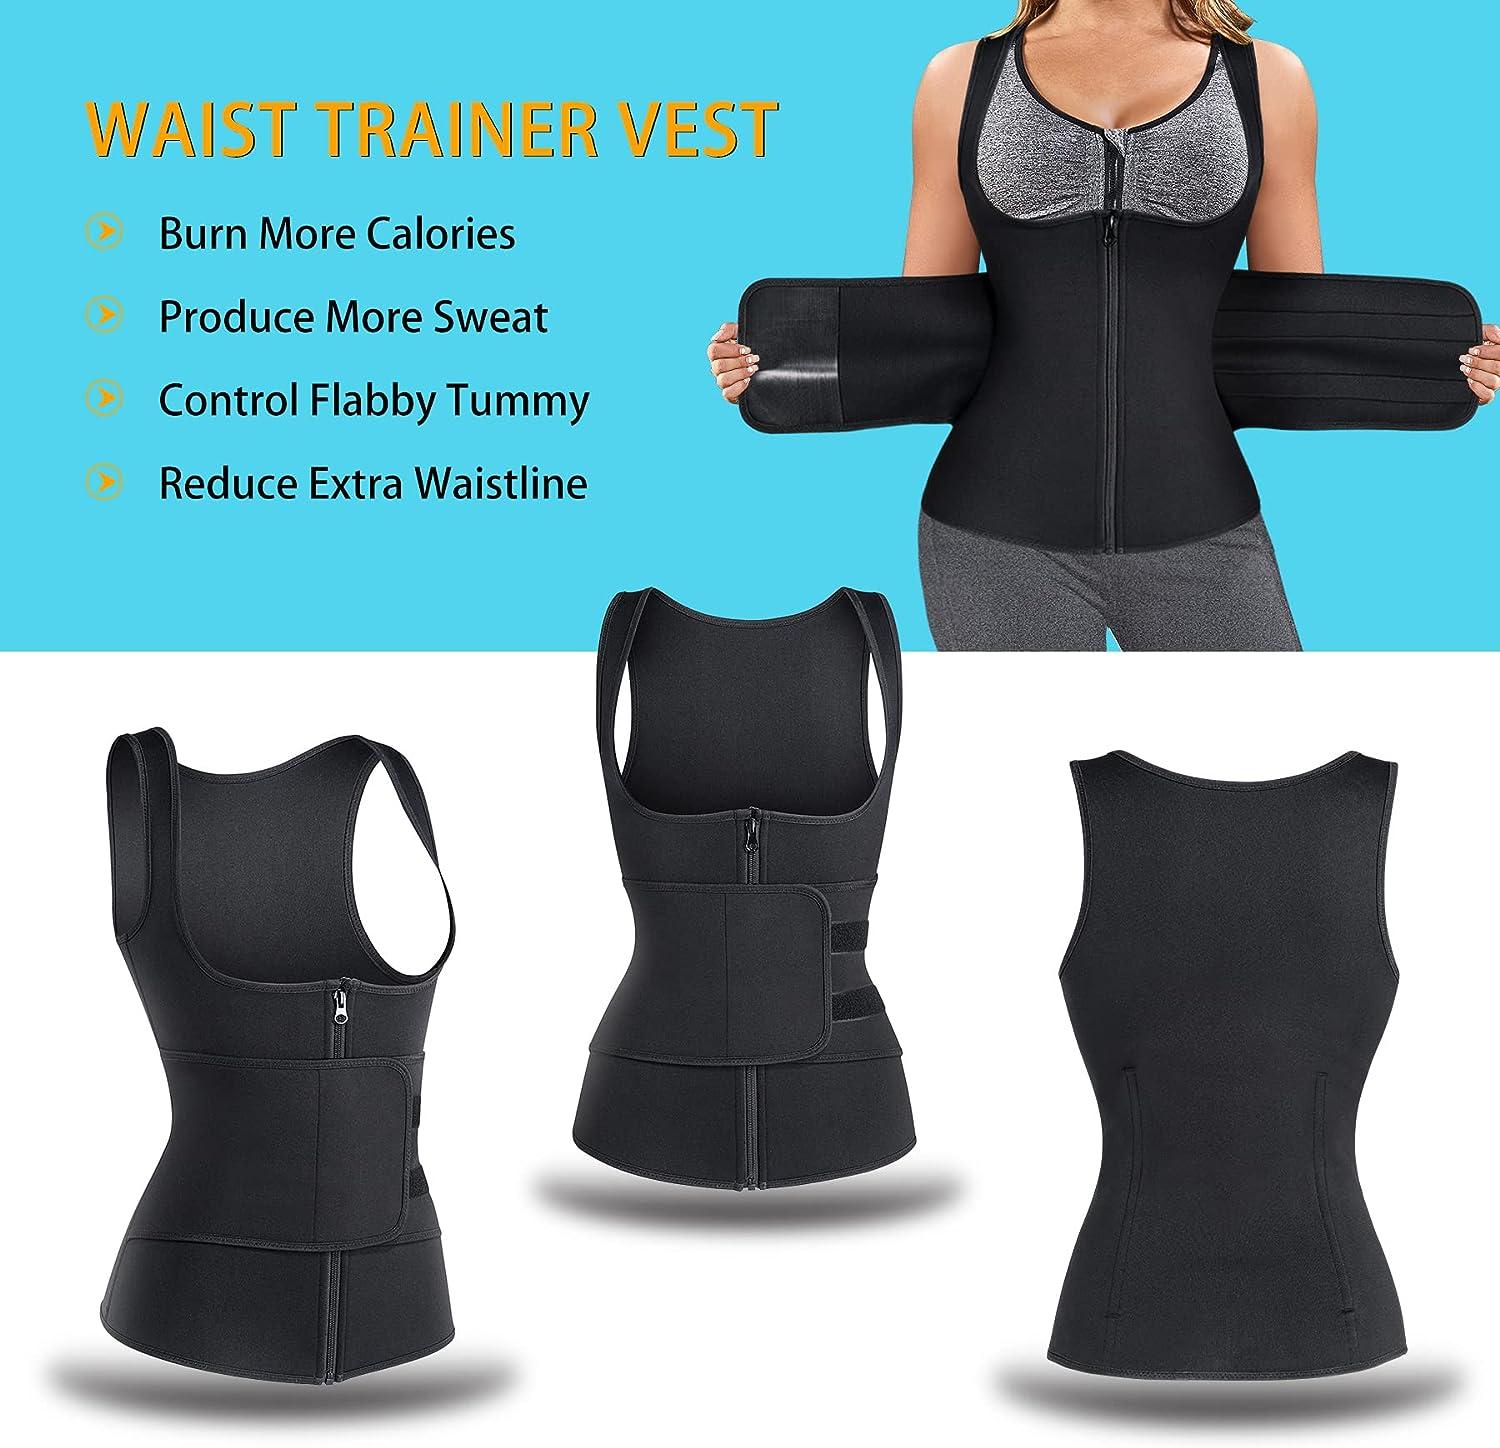 Summer Body Shaper C&A For Women Slimming Waist Trainer Vest With